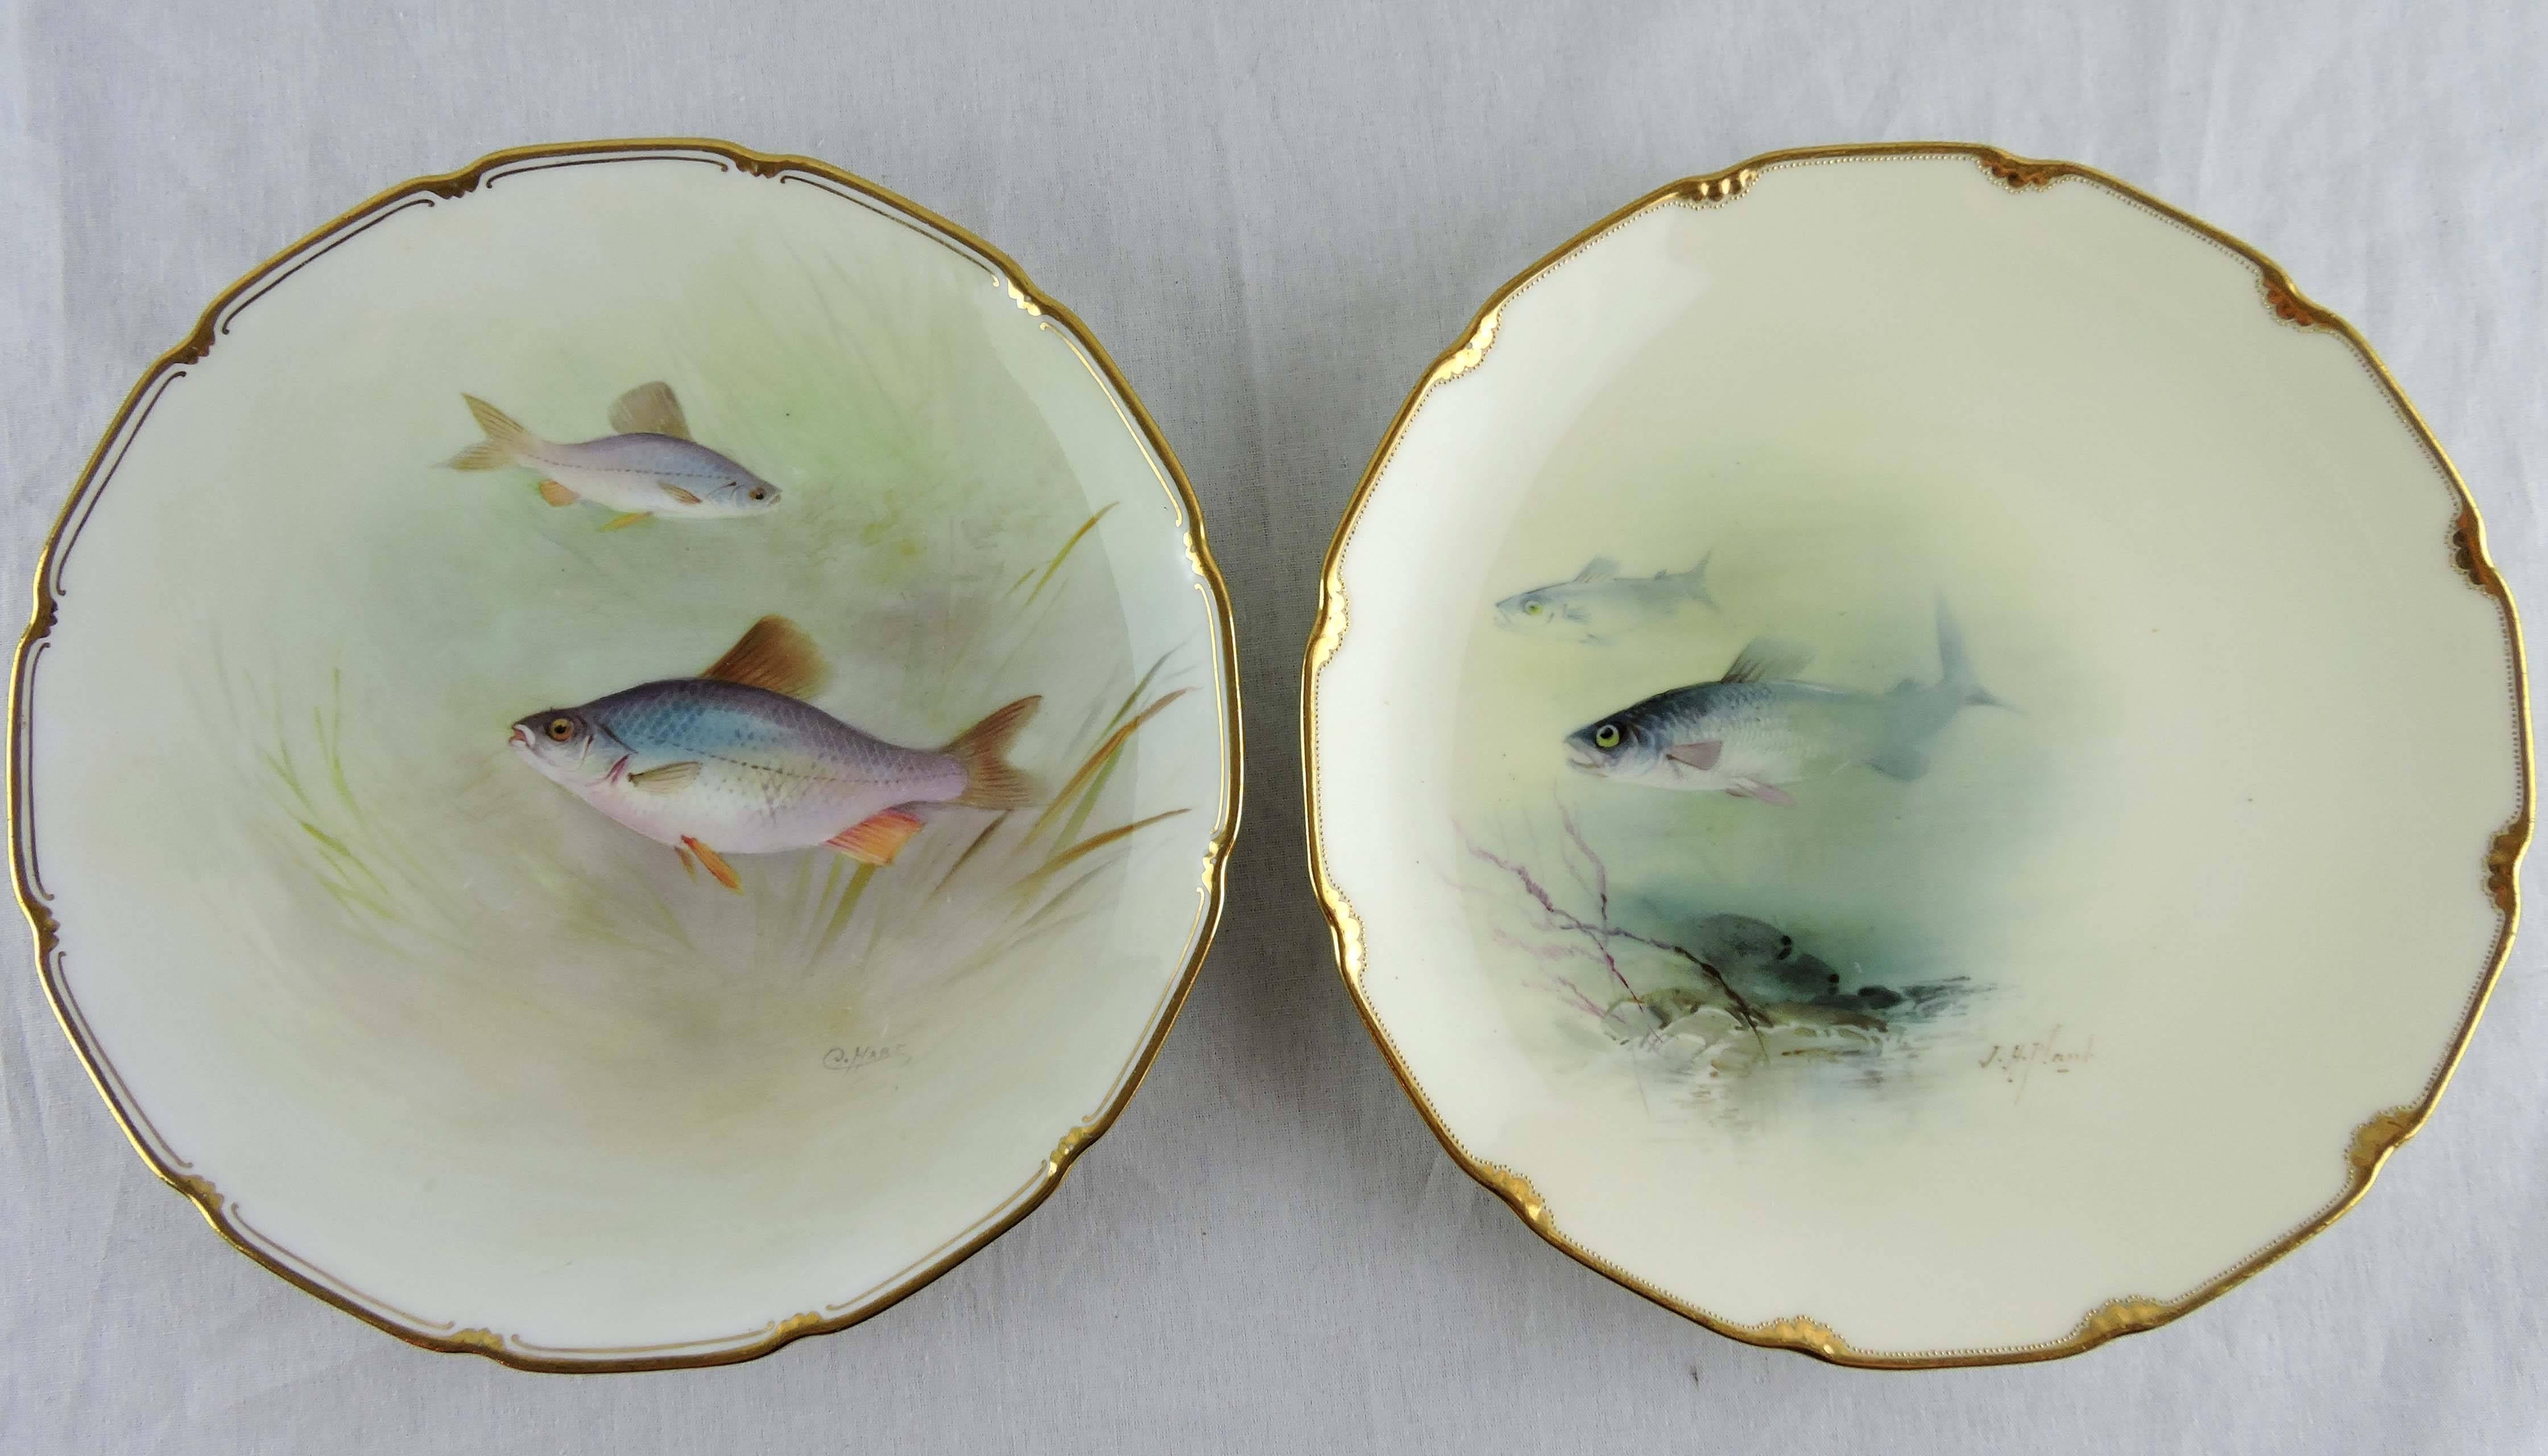 Edwardian Set of Eight Hand-Painted and Signed Royal Doulton Fish Plates, 1902-1922